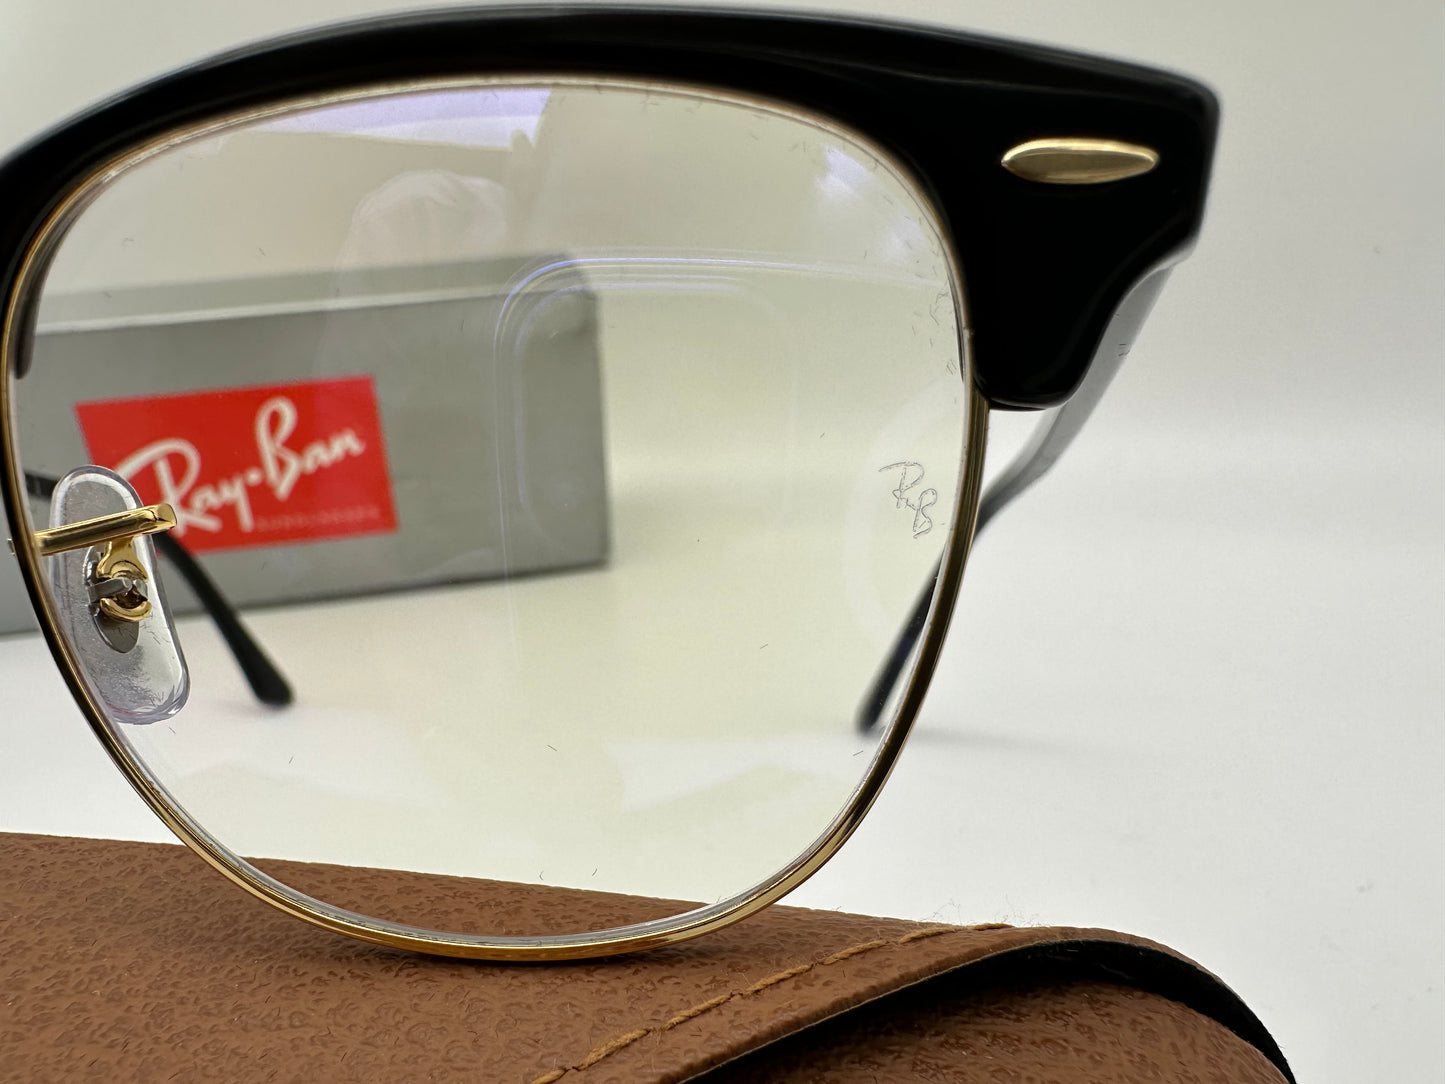 Ray Ban Clubmaster Blue Light Blocking Clear 51mm 7485 RB3016 Made in Italy